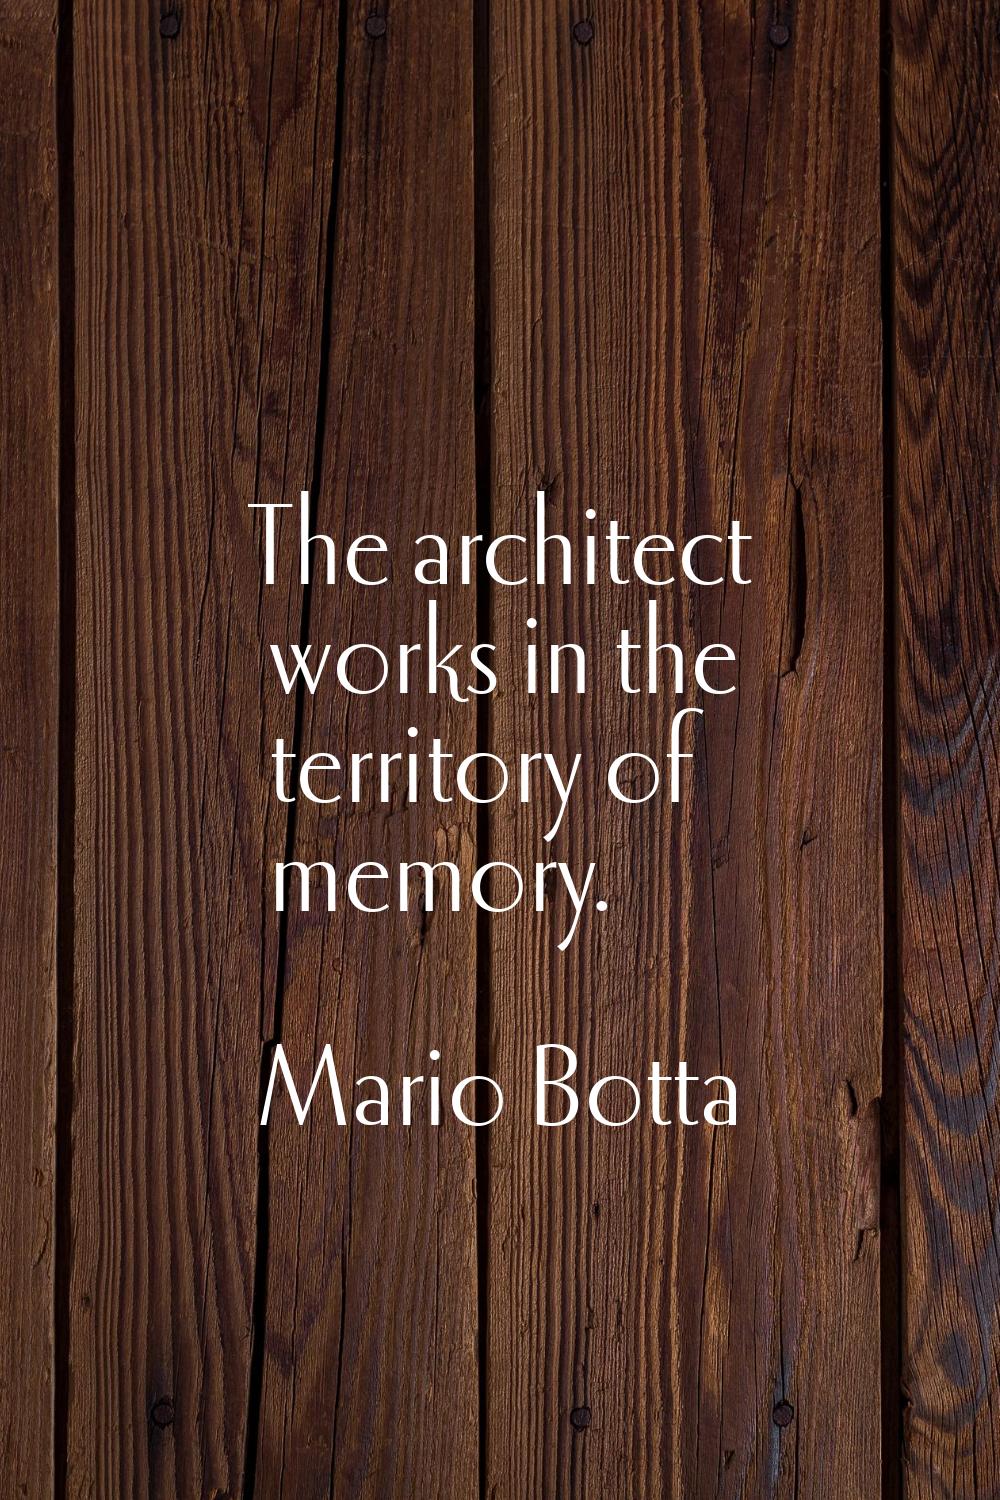 The architect works in the territory of memory.